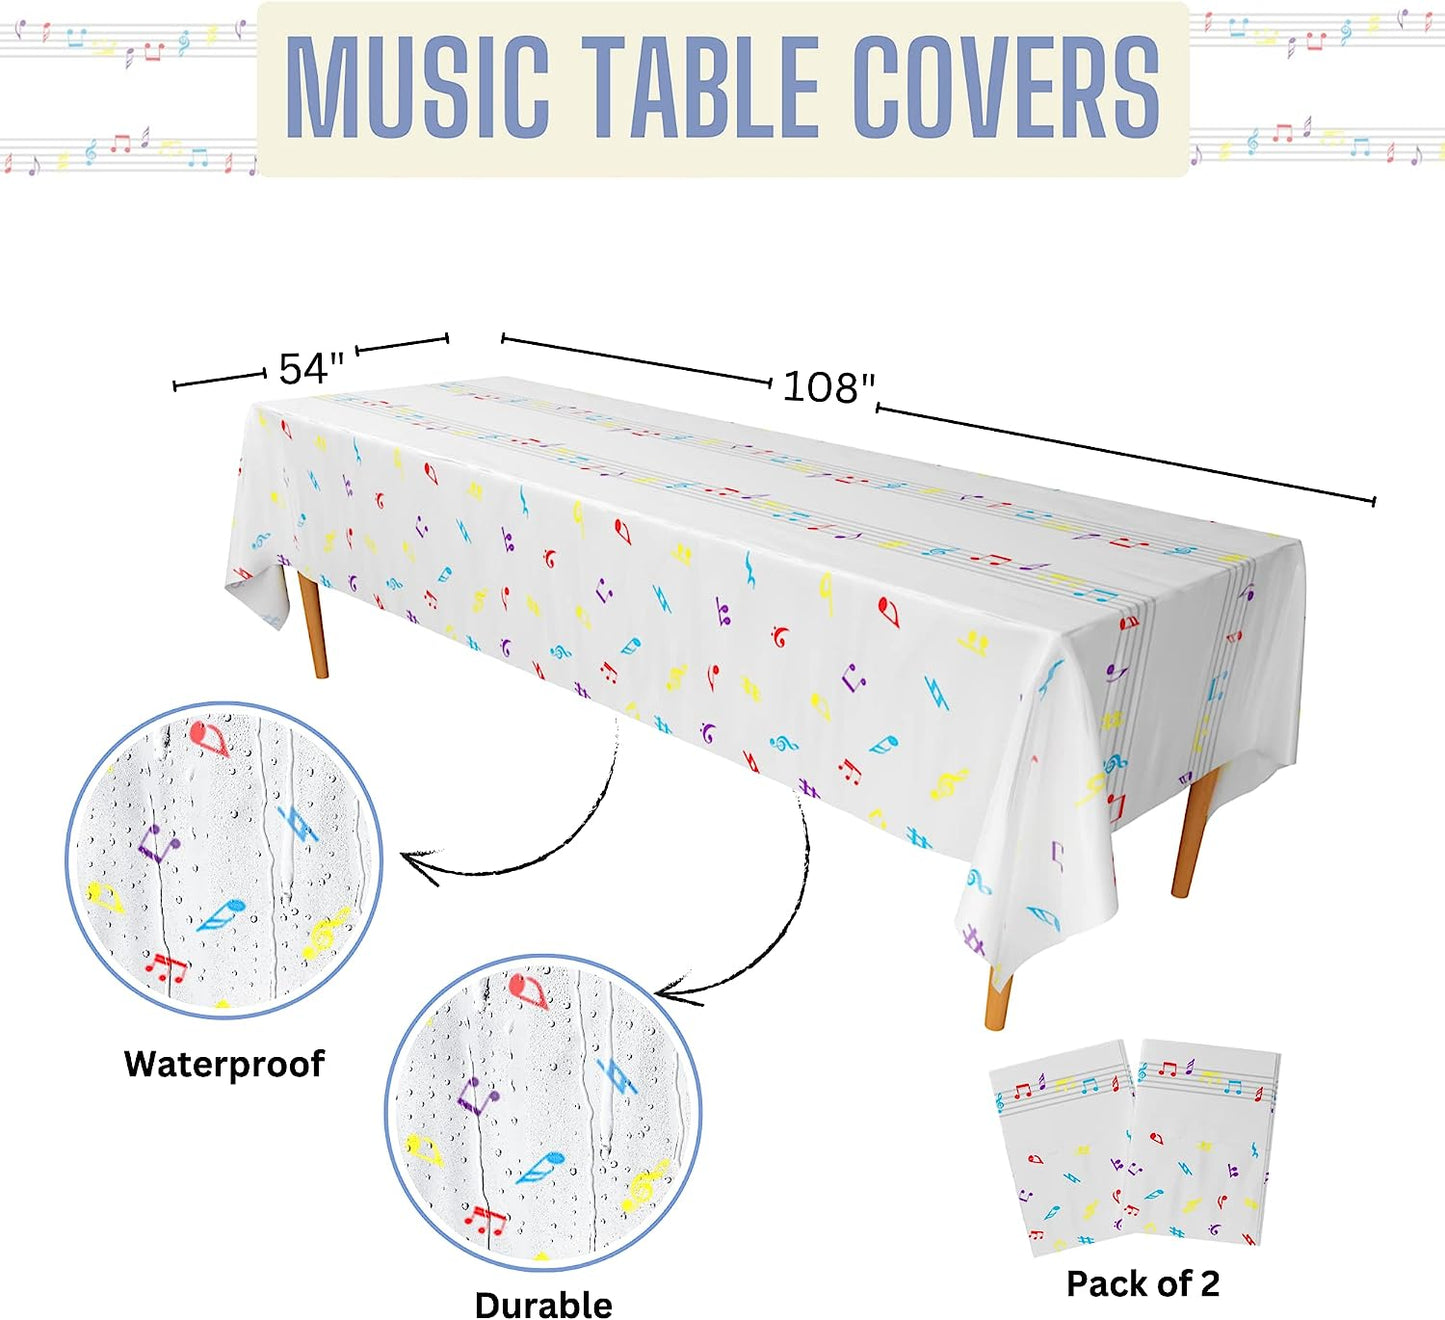 Image of a waterproof and durable music-themed table cover draped over a square table, measuring approximately 108" x 54", suitable for adding a note-filled style to a party table and creating lasting memories.